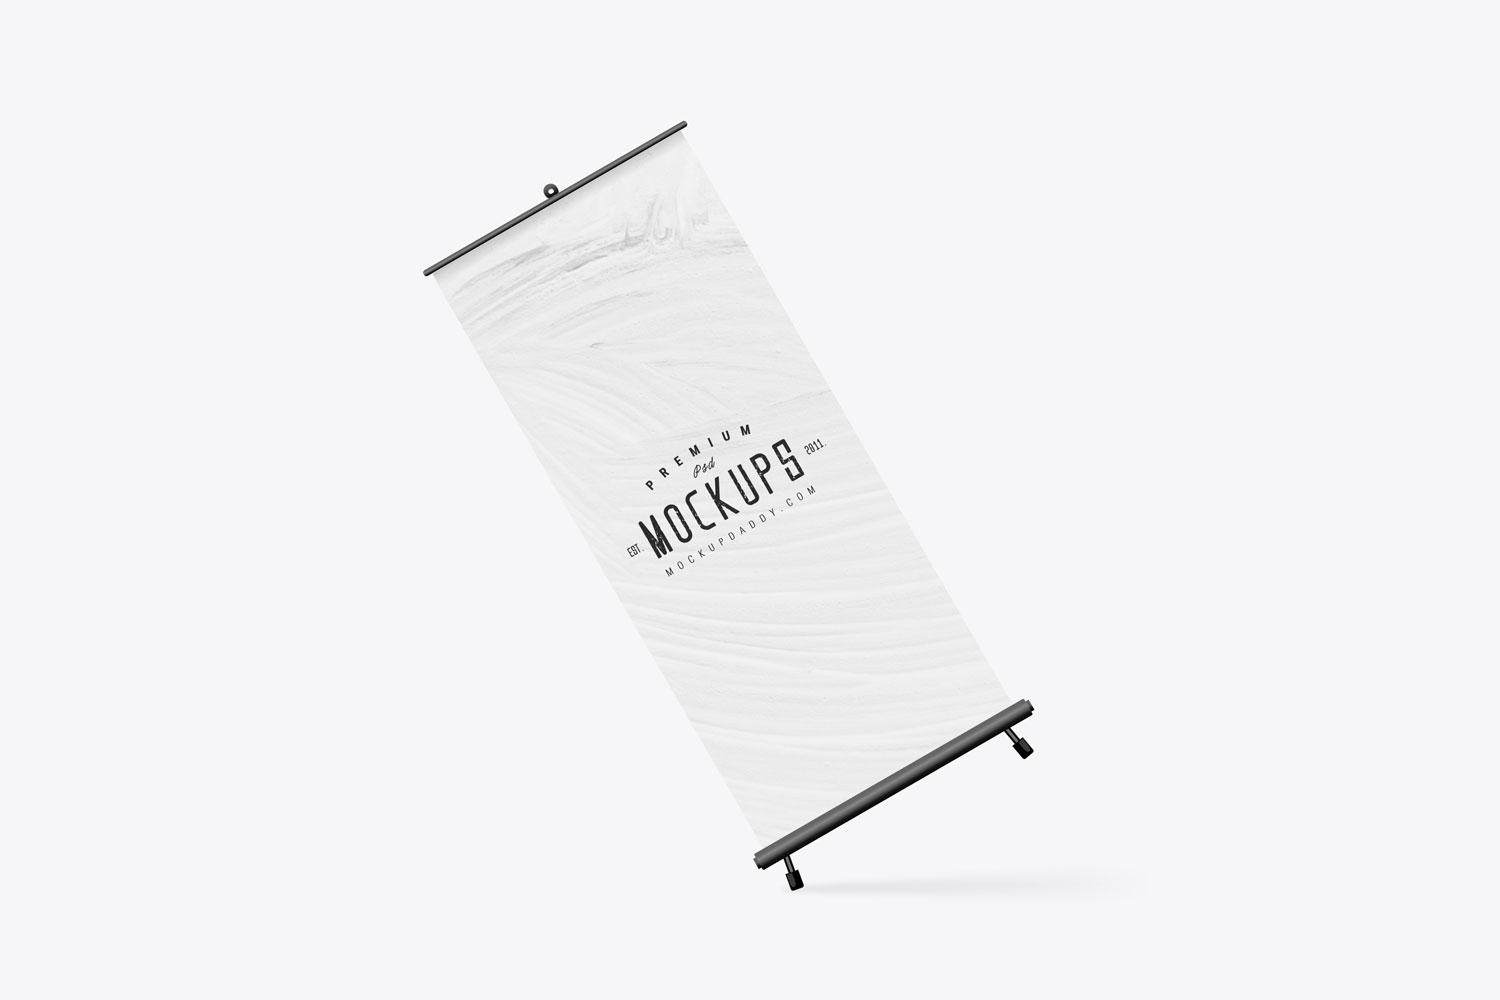 Digital event standee mockup at an angle